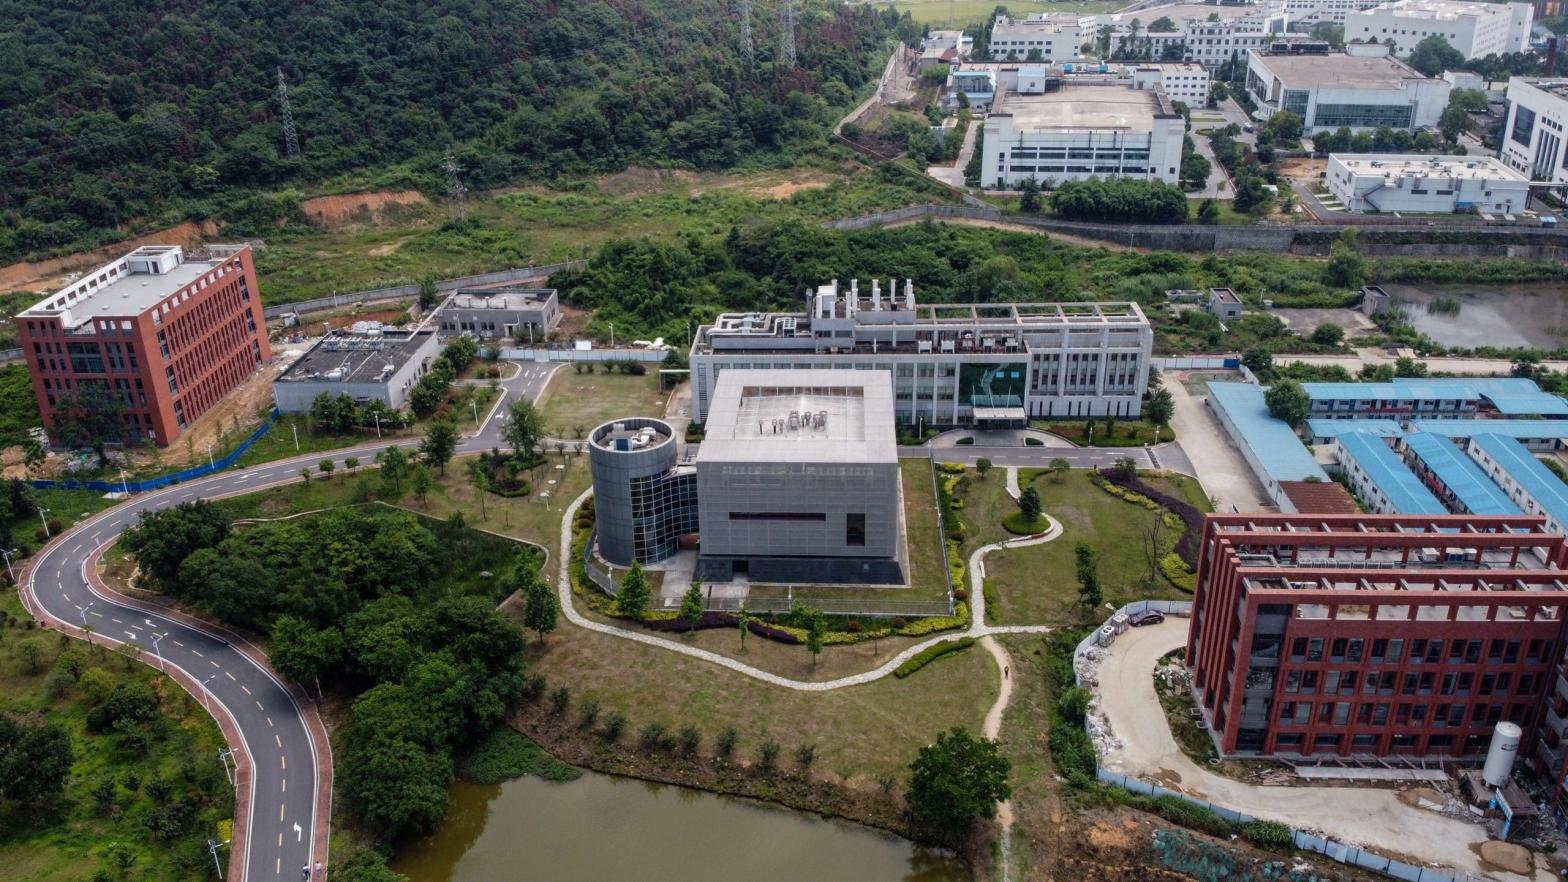 An aerial view shows the P4 laboratory (C) on the campus of the Wuhan Institute of Virology in Wuhan in China's central Hubei province on May 27, 2020.  (Photo: Hector Retamal, Getty Images)